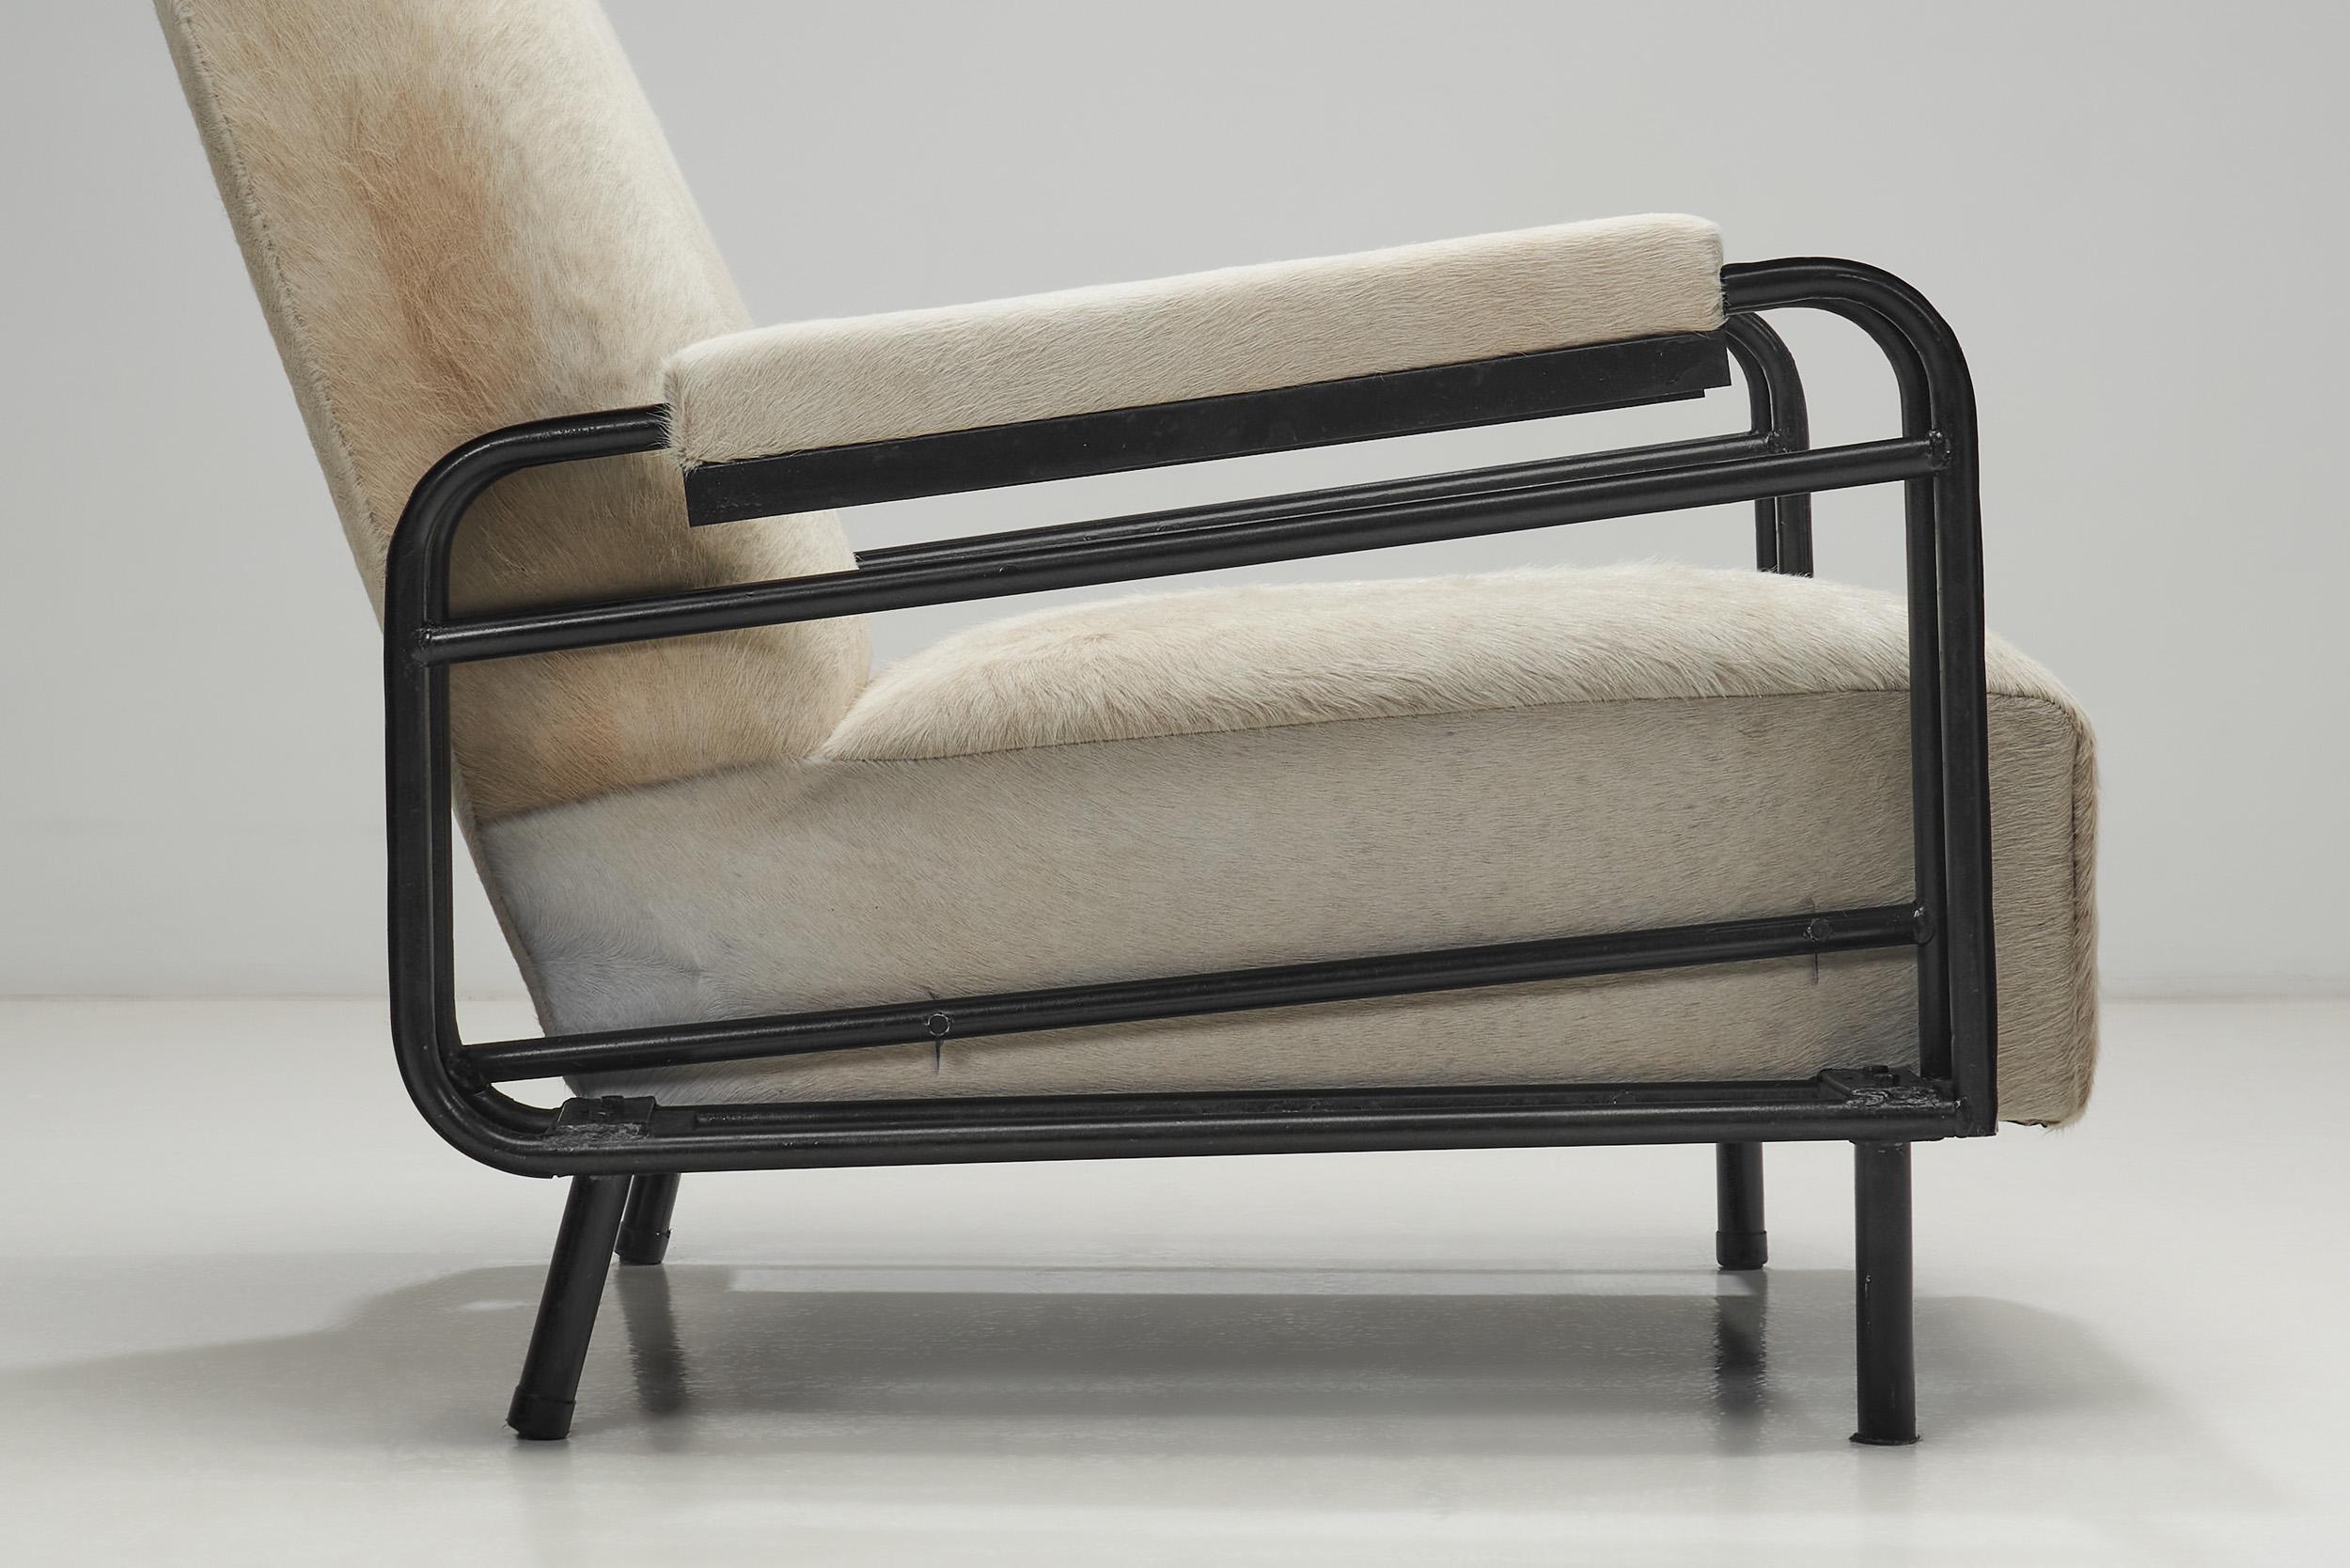 Airborne Metal Lounge Chairs Upholstered in Cow Hide, France ca 1950s For Sale 7